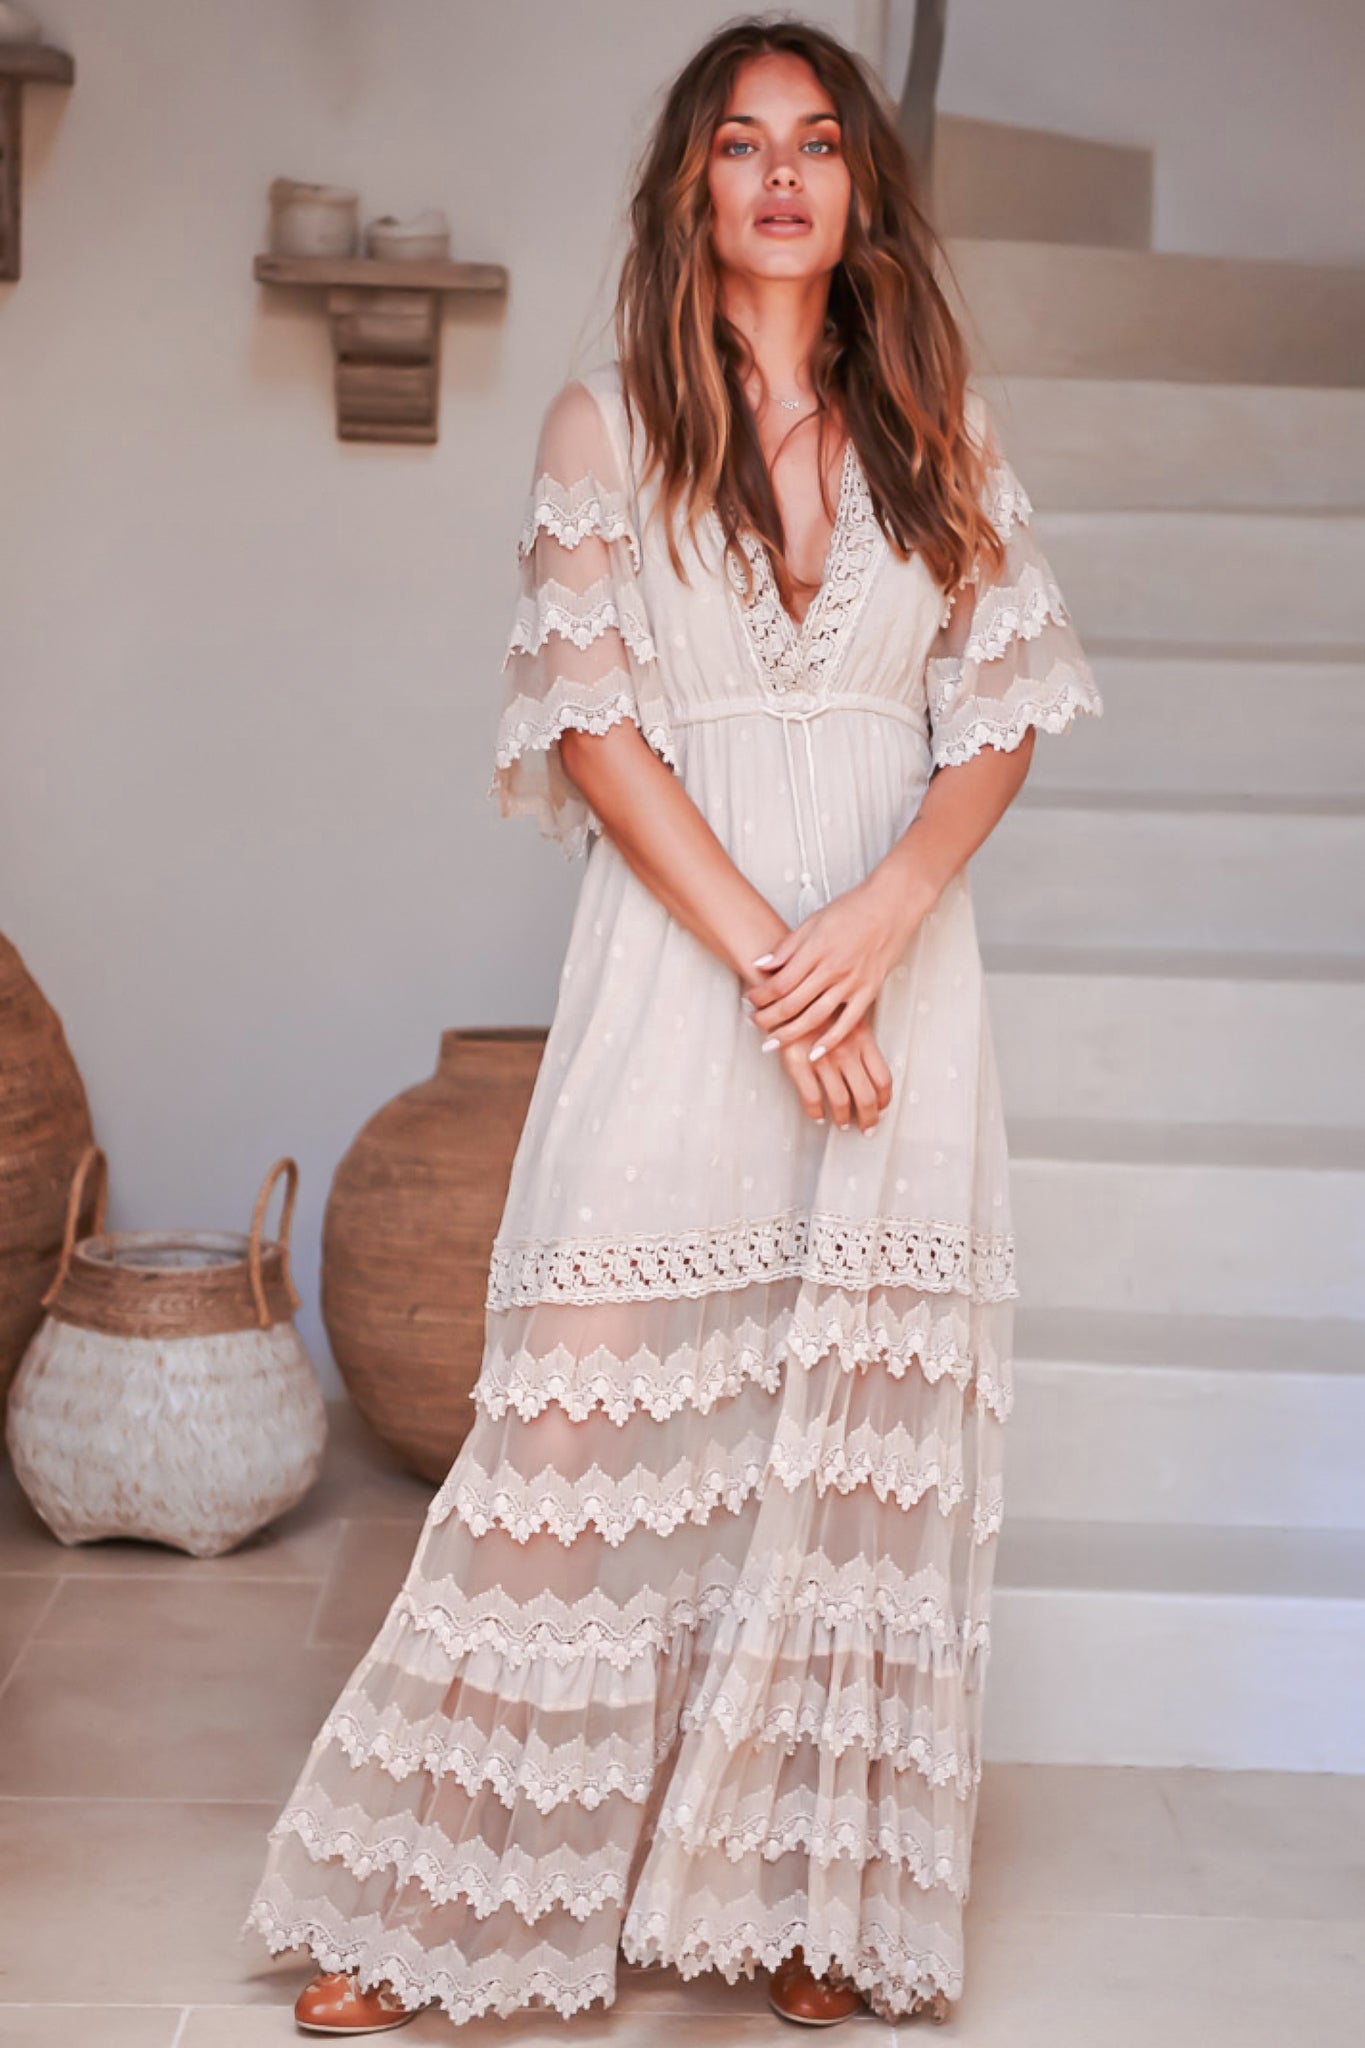 JAASE - Bungalow Maxi Dress: Emroidered Lace Deep V Neck Dress with Open Batwing Sleeves in Sand